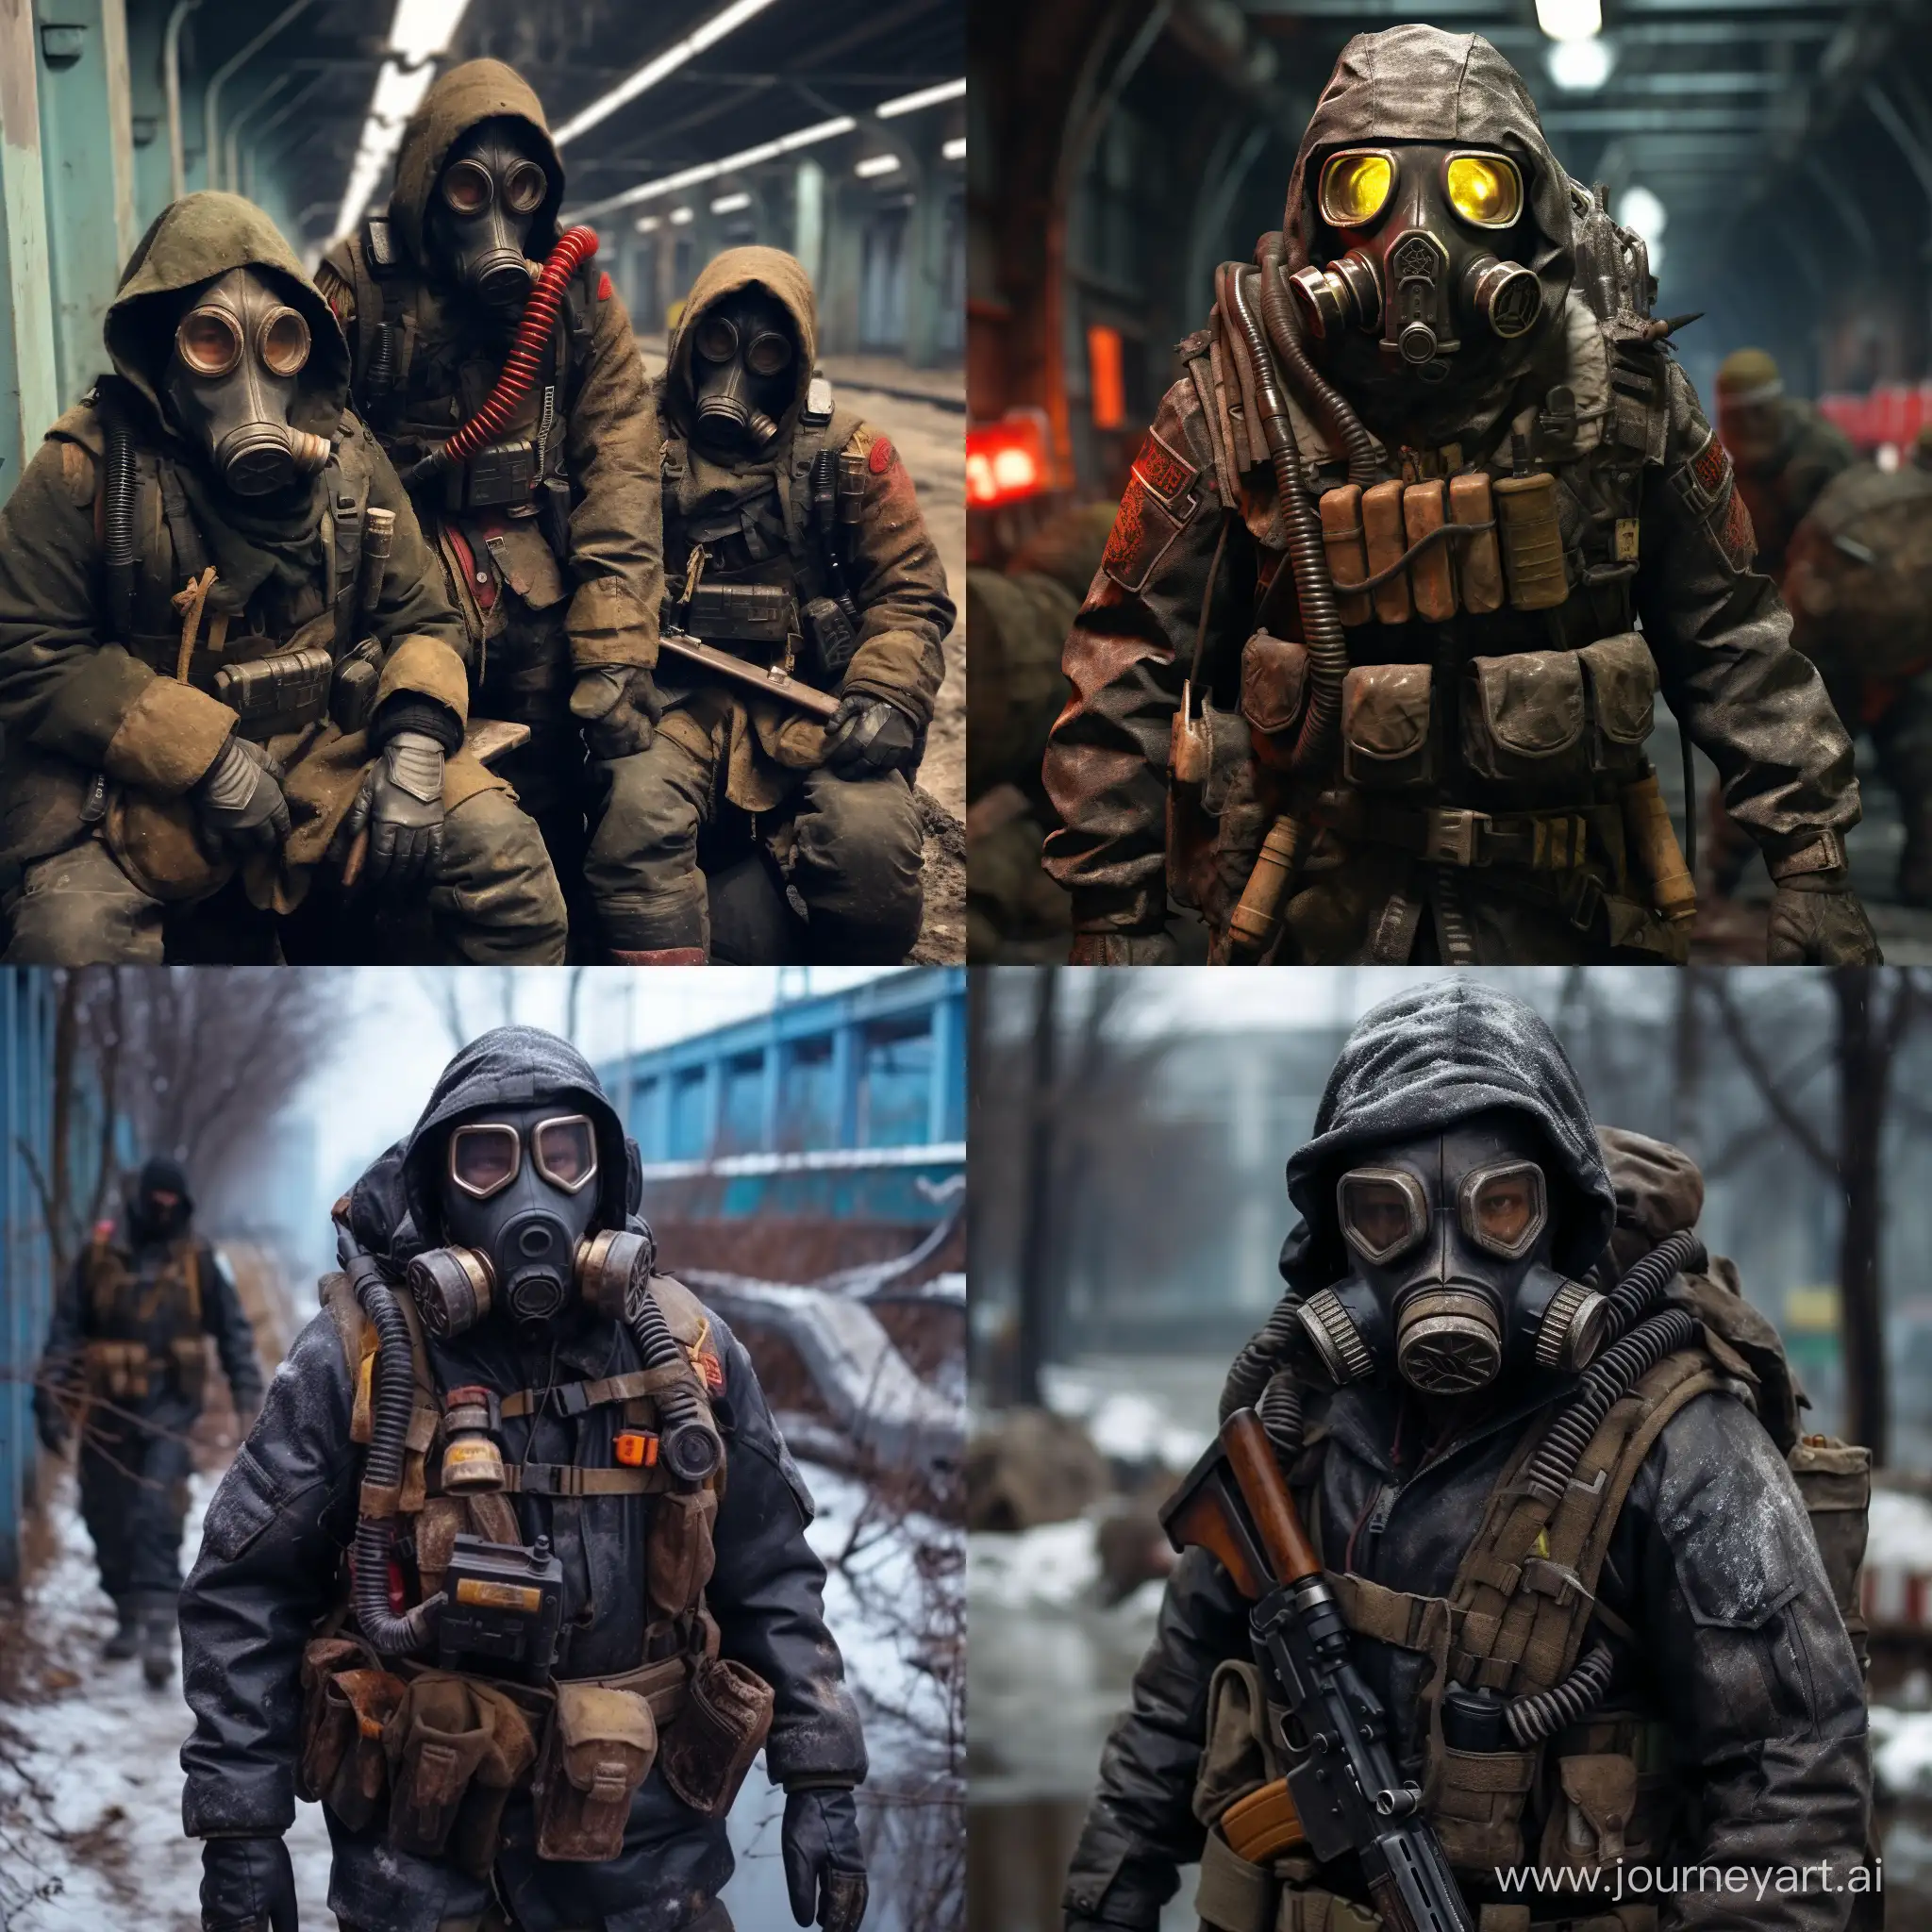 PostApocalyptic-Militia-in-Kalinin-Confederation-with-Gas-Masks-and-Homemade-Rifles